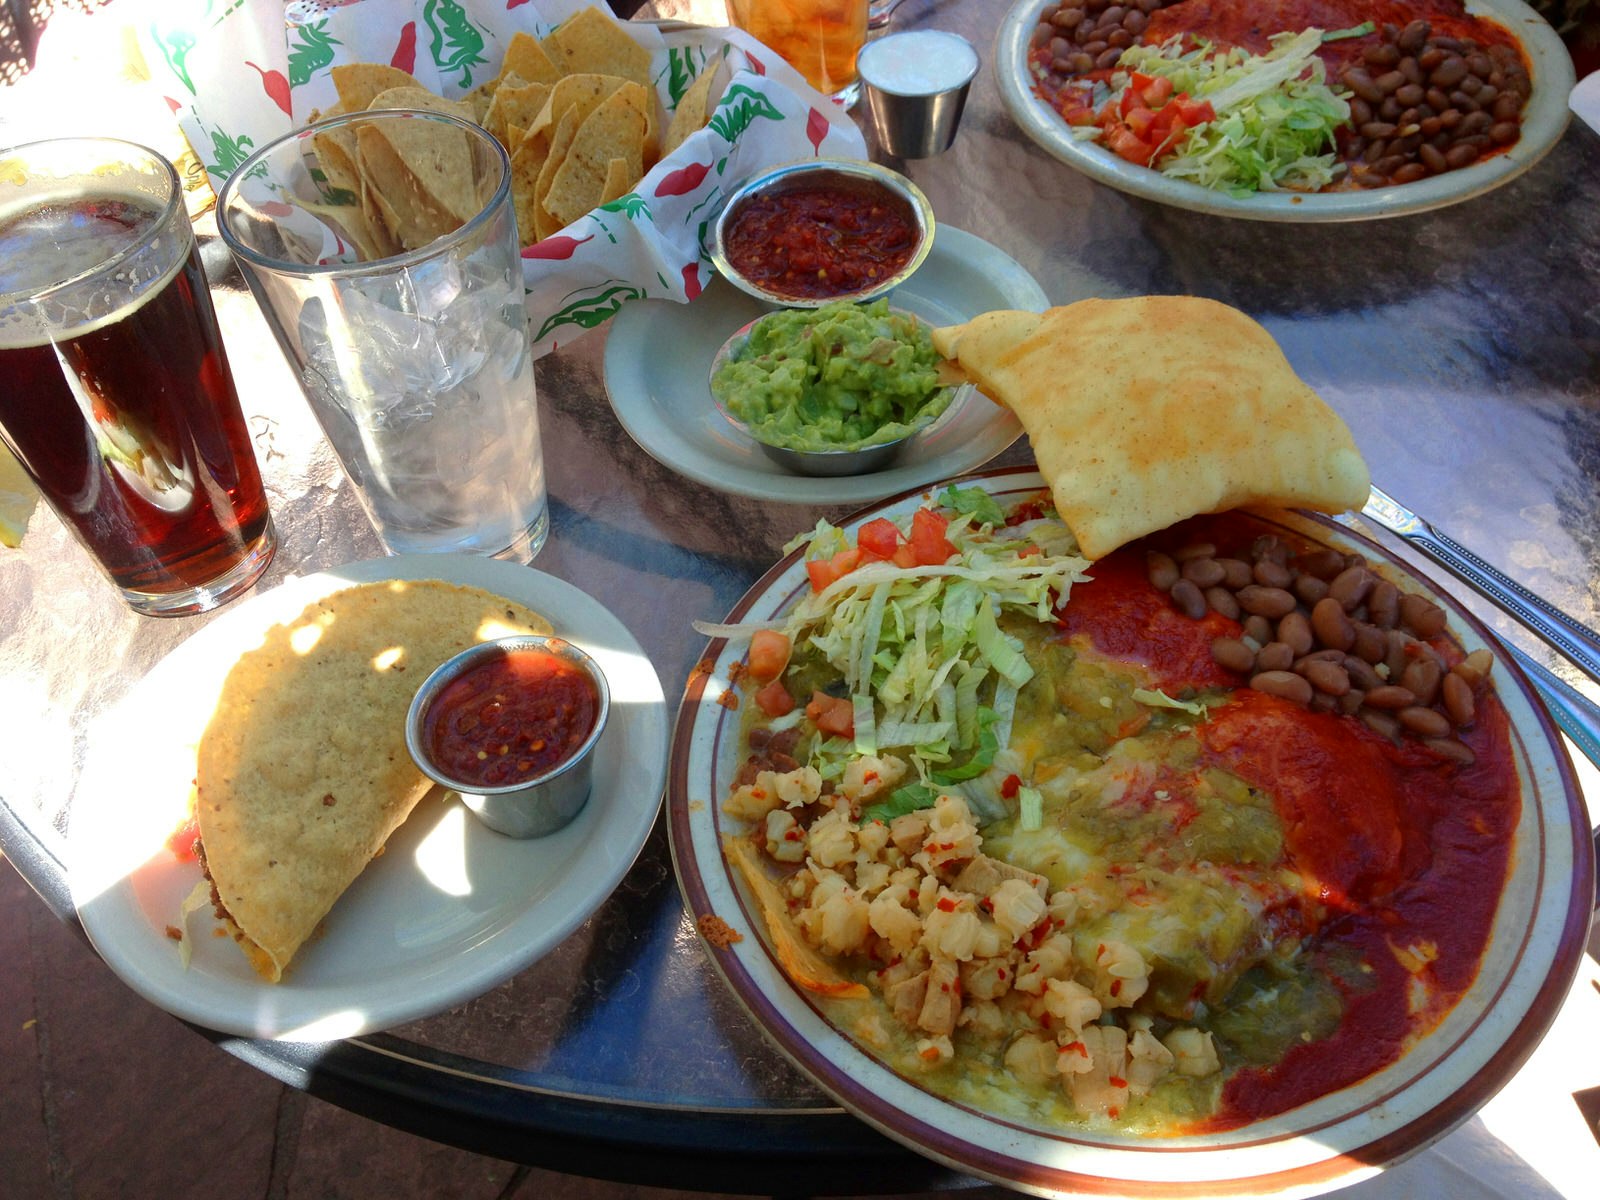 It's Christmas! A combination plate at La Choza in Santa Fe: red and green chile enchiladas, sopapillas, taco, salsa and a Santa Fe Brewing Company Nut Brown ale © Megan Eaves / Lonely Planet